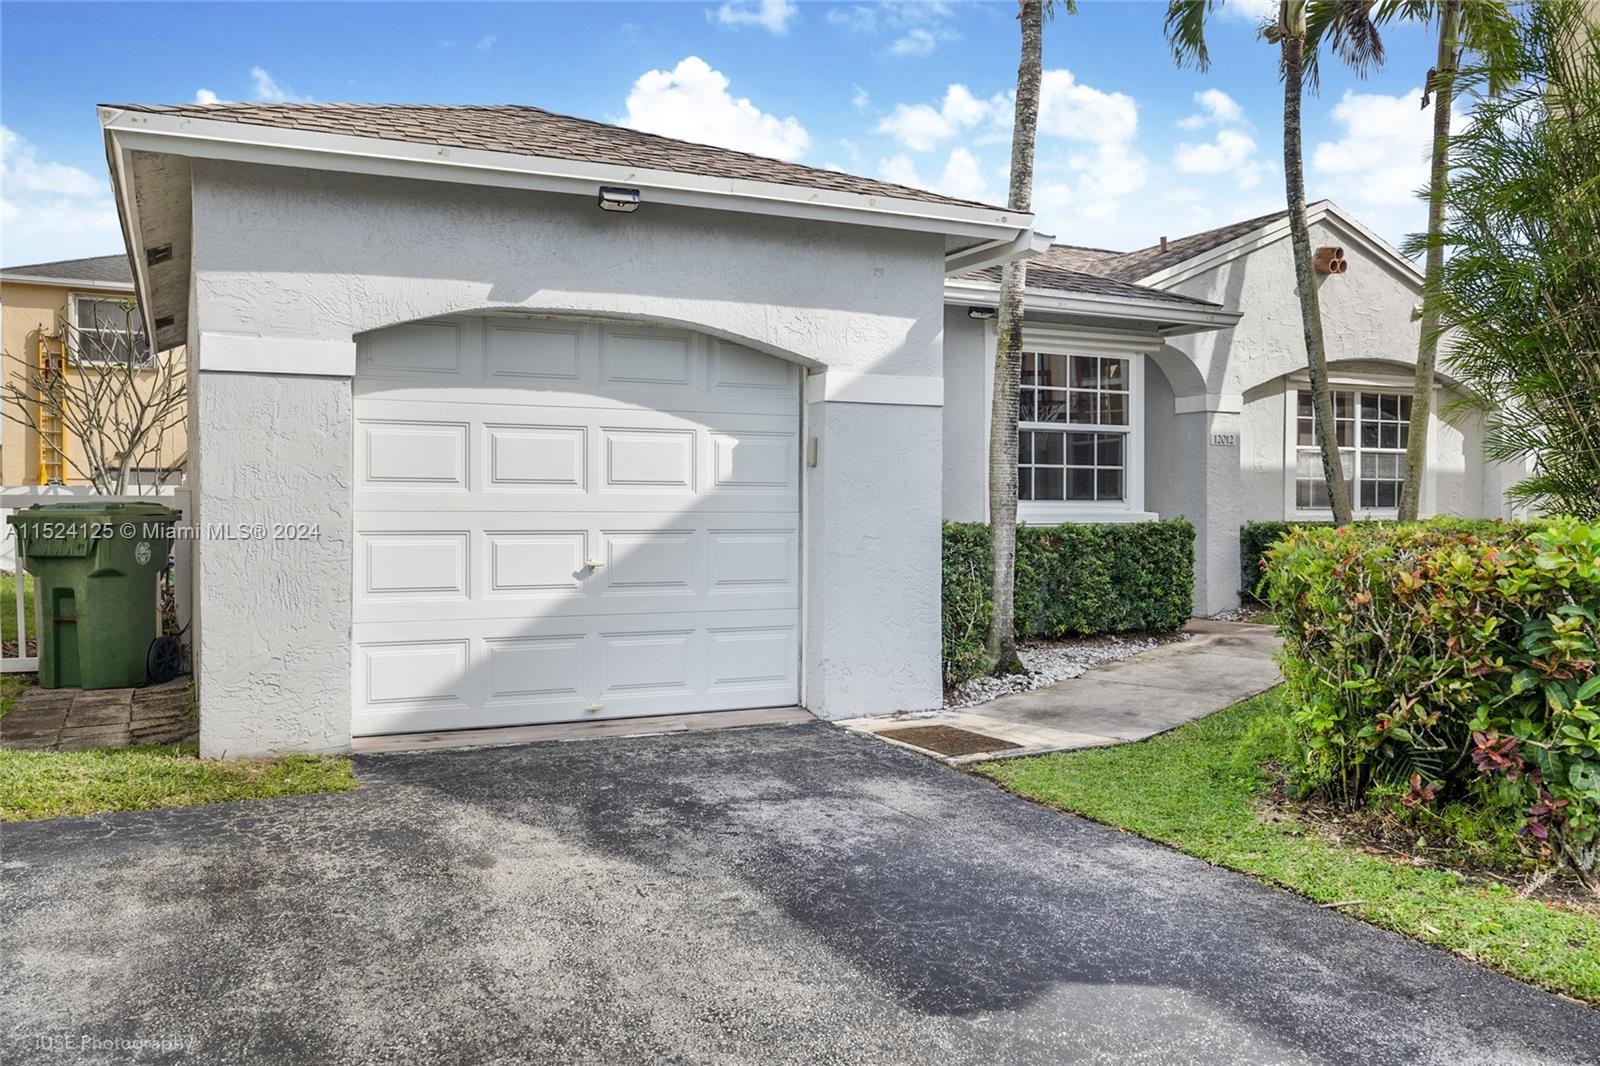 Photo of 12012 NW 13th St in Pembroke Pines, FL